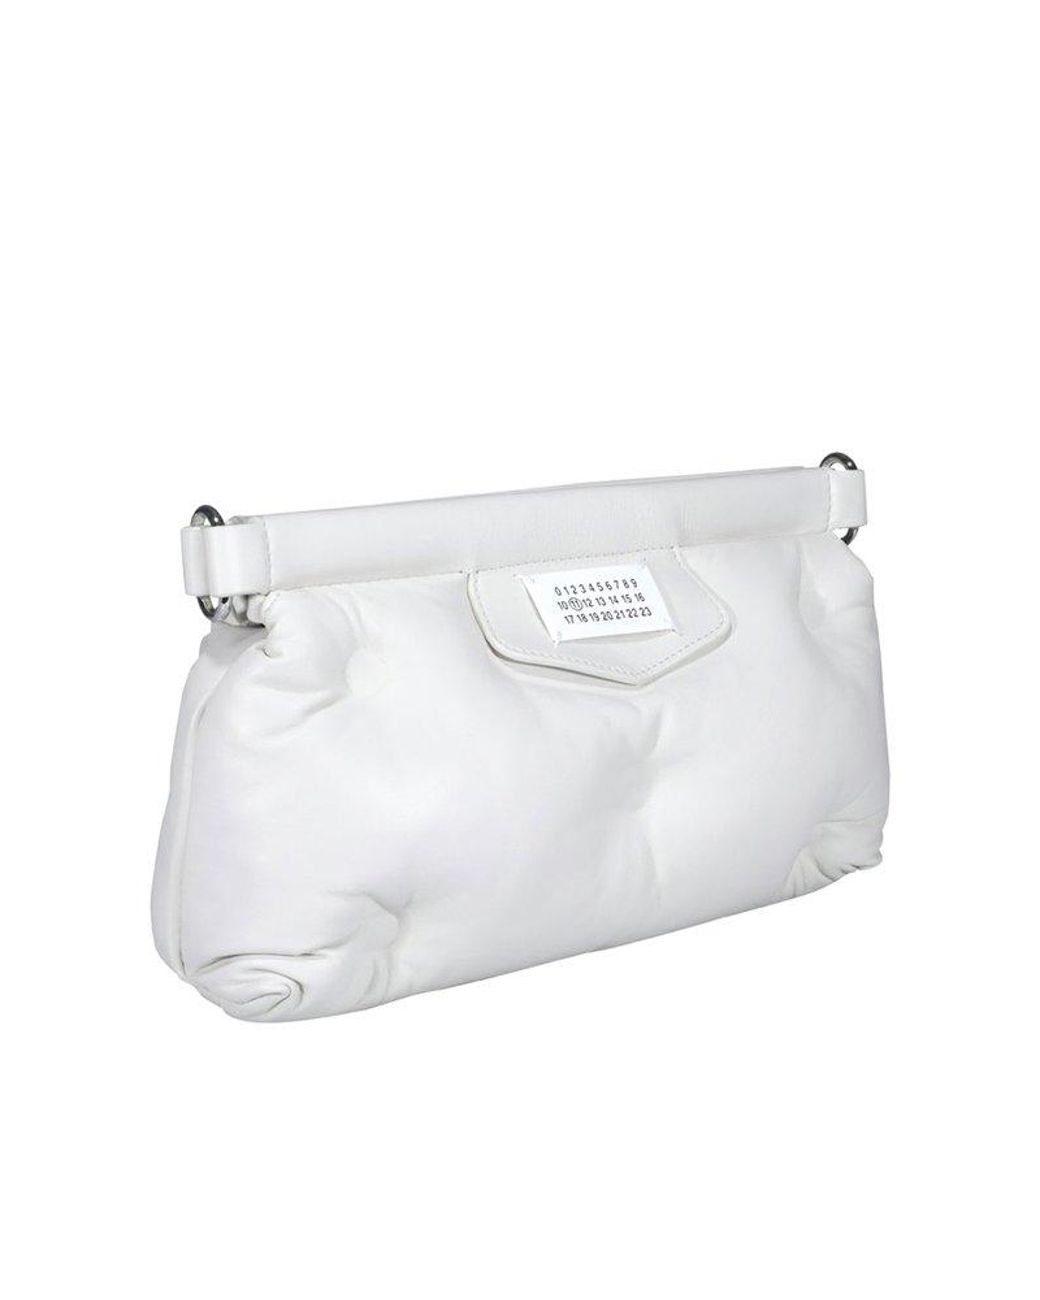 Womens Bags Clutches and evening bags White Maison Margiela Leather Glam Slam Clutch Bag in Beige 